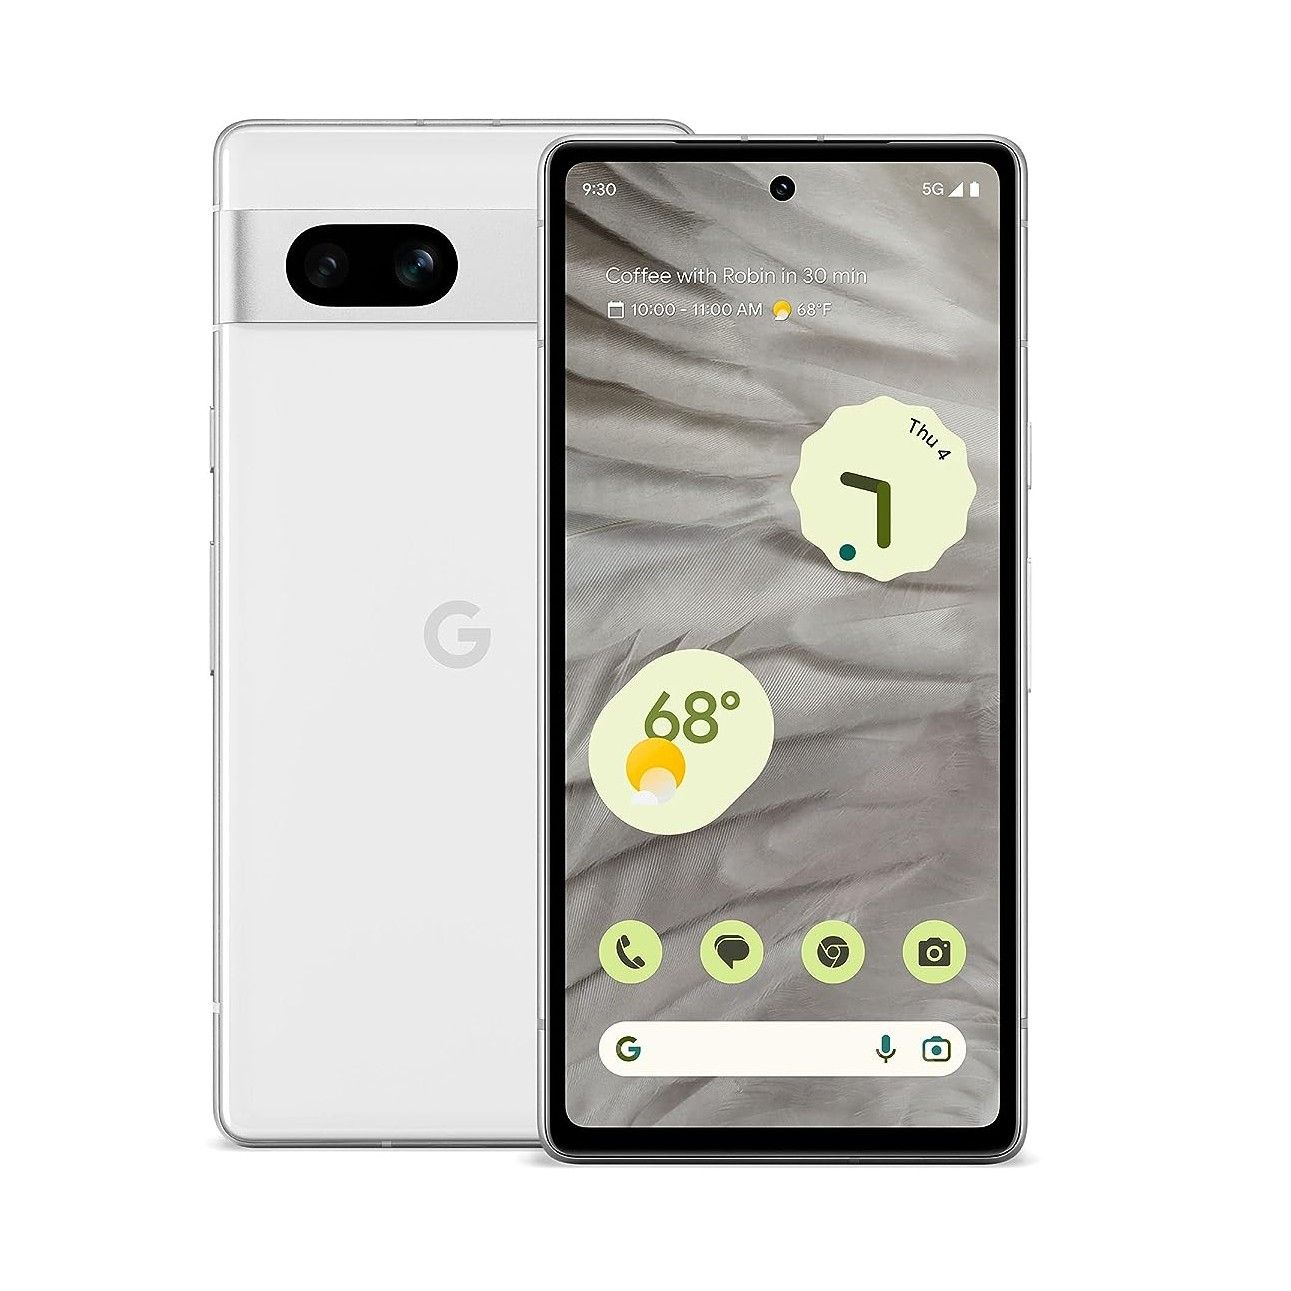 google pixel 7a, front and back views